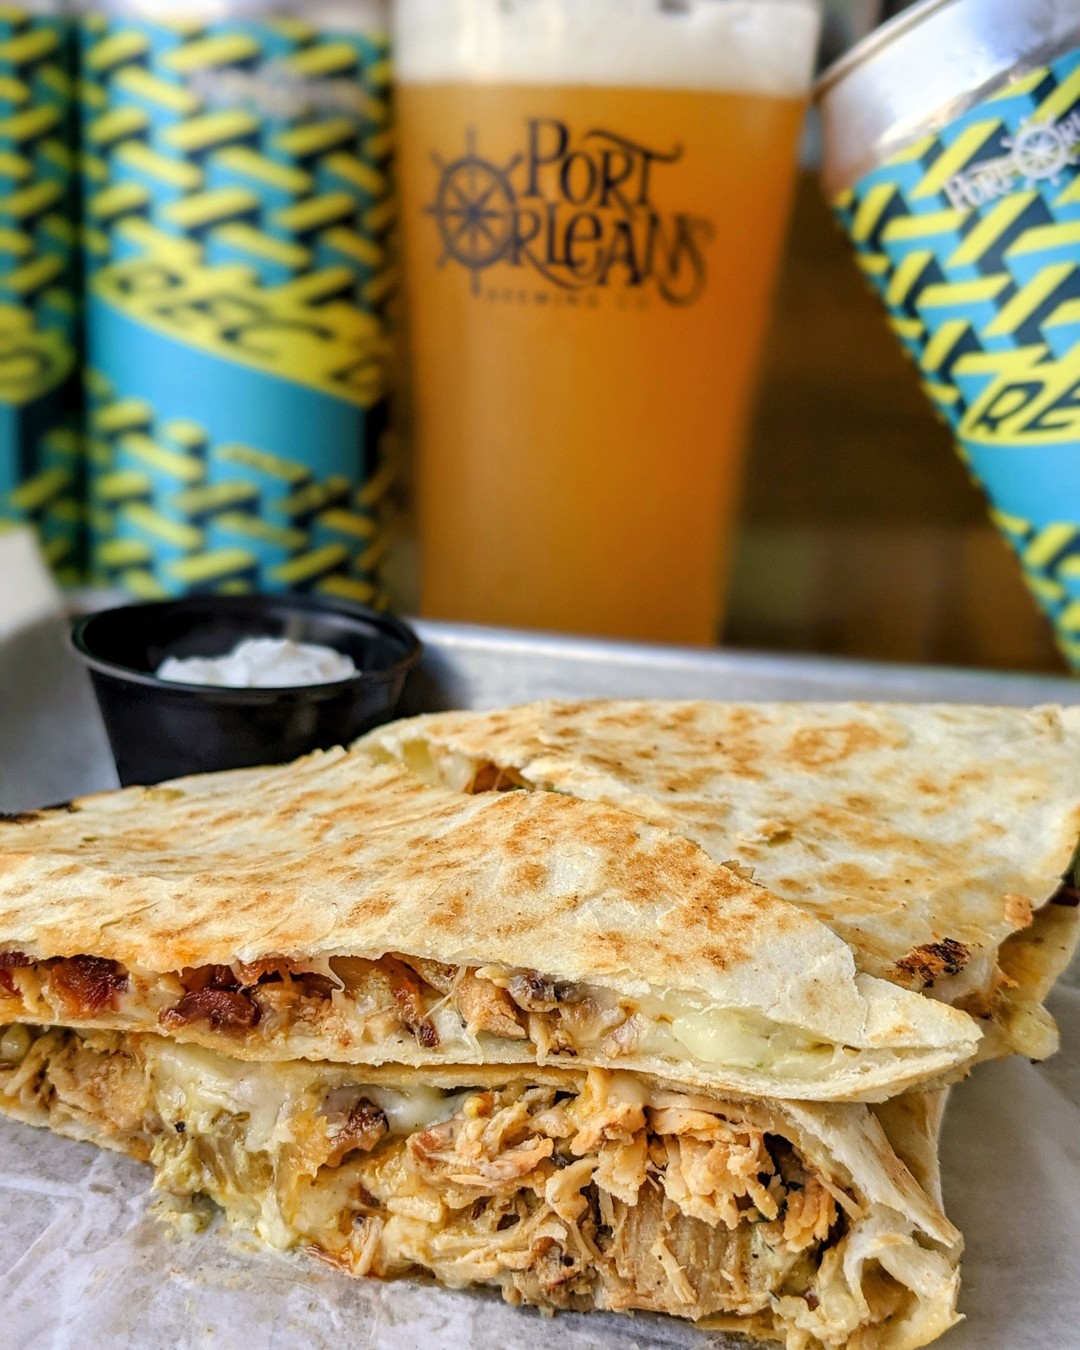 We know they say Tuesdays are for tacos, but have you tried our Hawaiian Chicken Quesadilla?! 😋

The perfect blend of chipotle chicken, jack cheese, caramelized pineapple, sugared bacon, poblano crema, and cilantro! 

Pair this with a AVO TACO signature cocktail at our Long Island location, or your favorite @portorleansbrewingco beer in NOLA to make this meal complete! 🍹🍻

 #nolalife #longislandny #longisland #portorleansbrewery #nolafood #nolaeats #nolafoodie #cocktails #longislandfoodies #lifoodies #lifoodie #newhydepark #tacos #quesadilla #eats